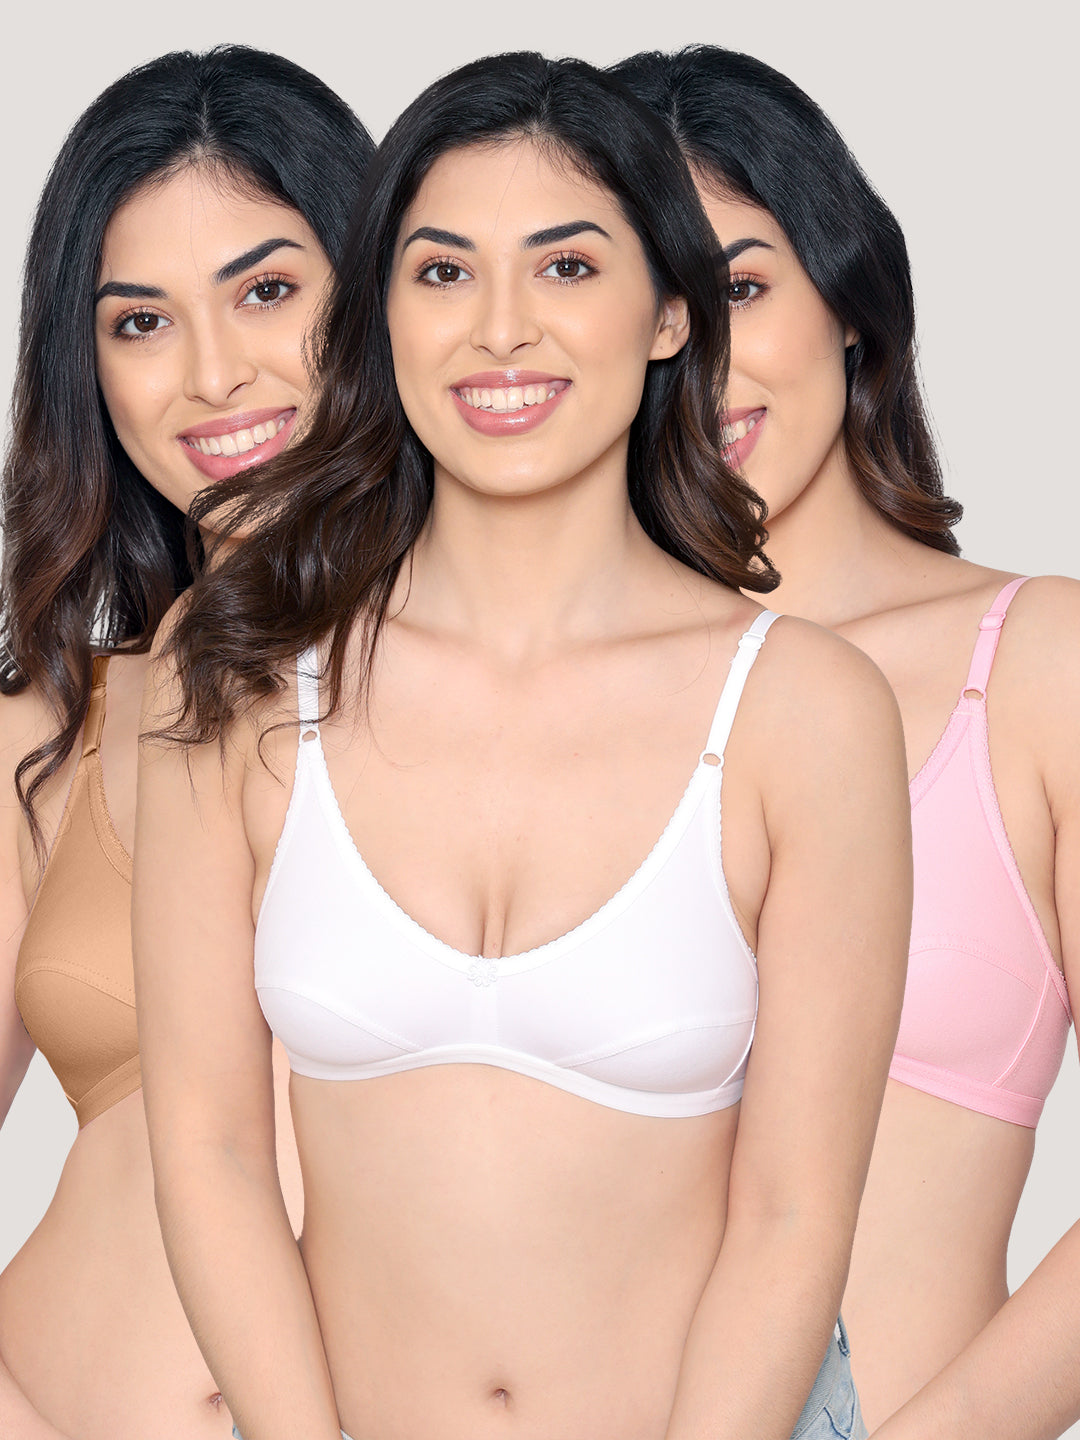 Kalyani Inner Wear - Beautiful bra can be stunning, comfortable and  affordable too. Get this trendy lace bra at flat 40% OFF. Shop Now:  www.kalyaniinnerwear.com Article No: 5011 #KalyaniInnerwear #Bra #Comfort  #Style #